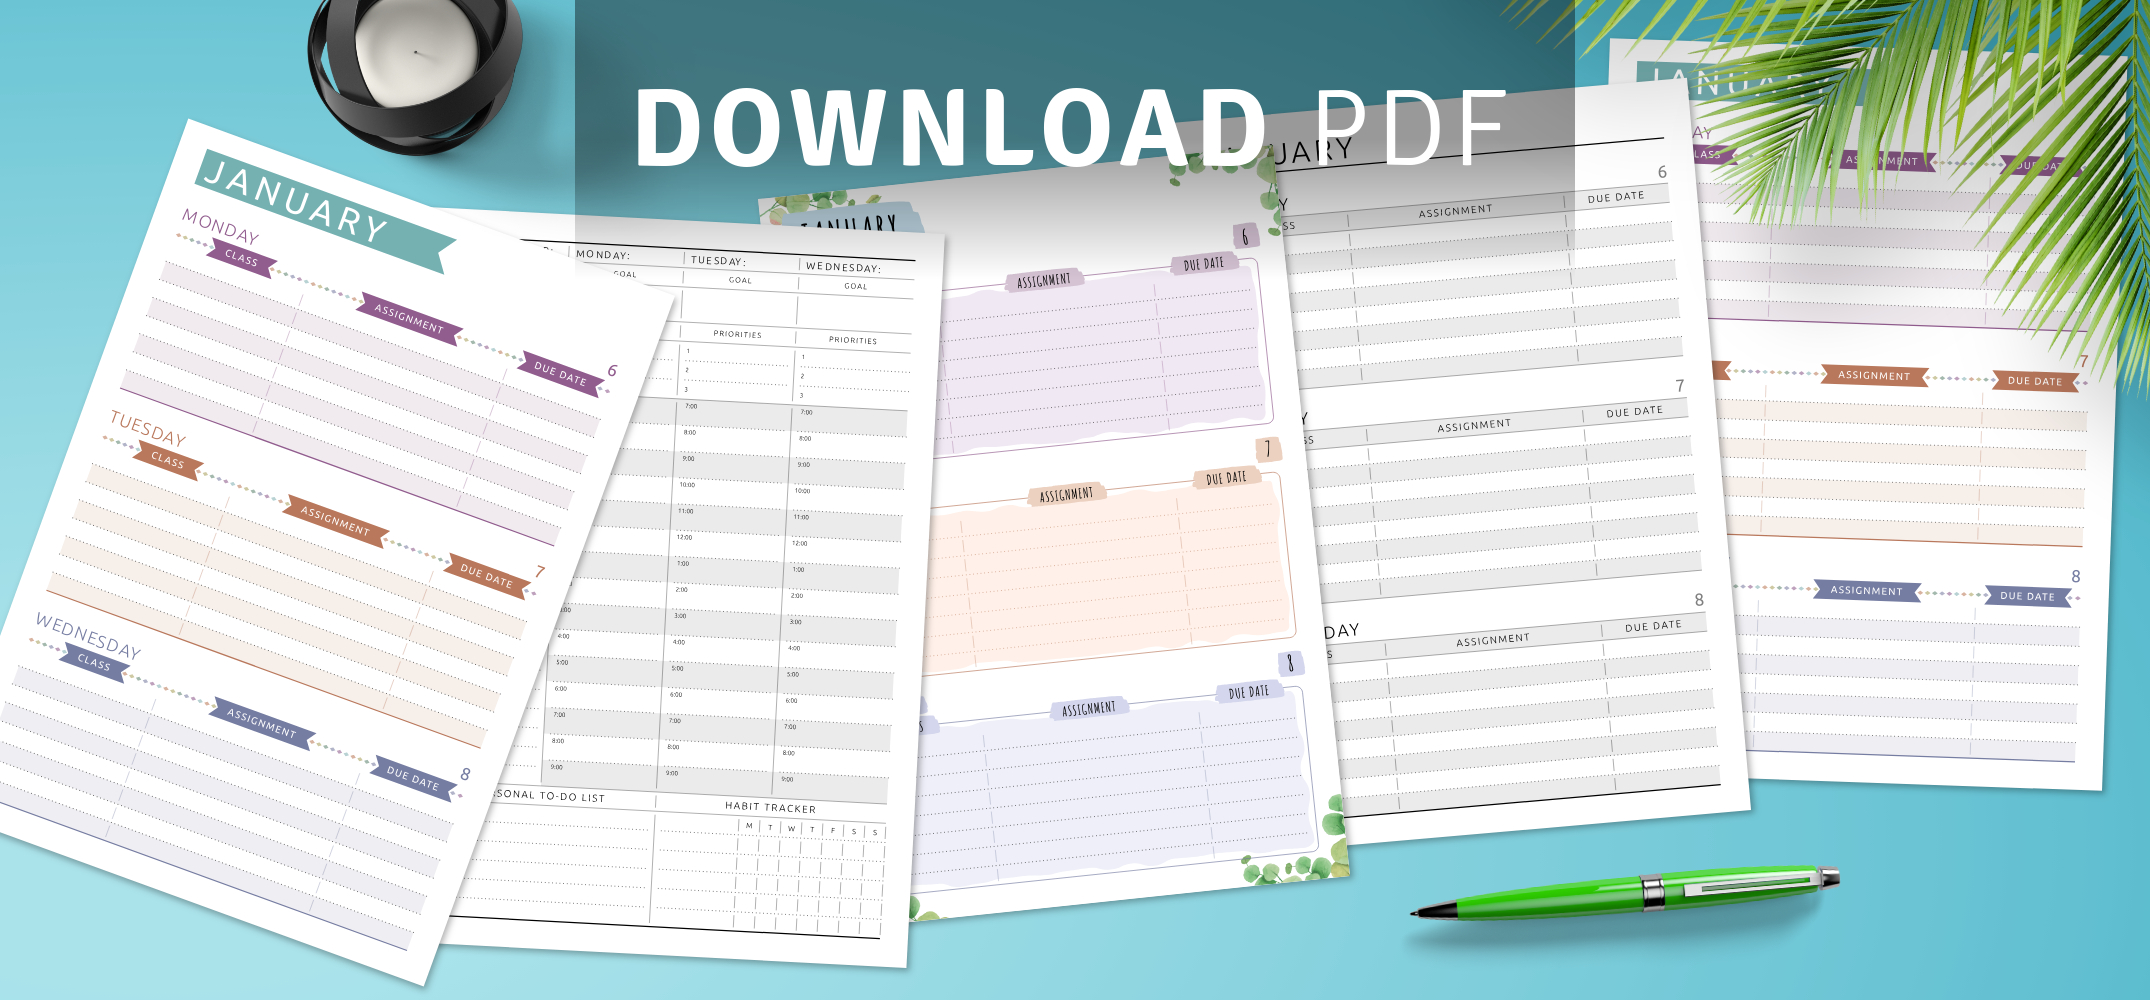 Weekly Calendar Template Pdf - Download Now  Download Calendar Template